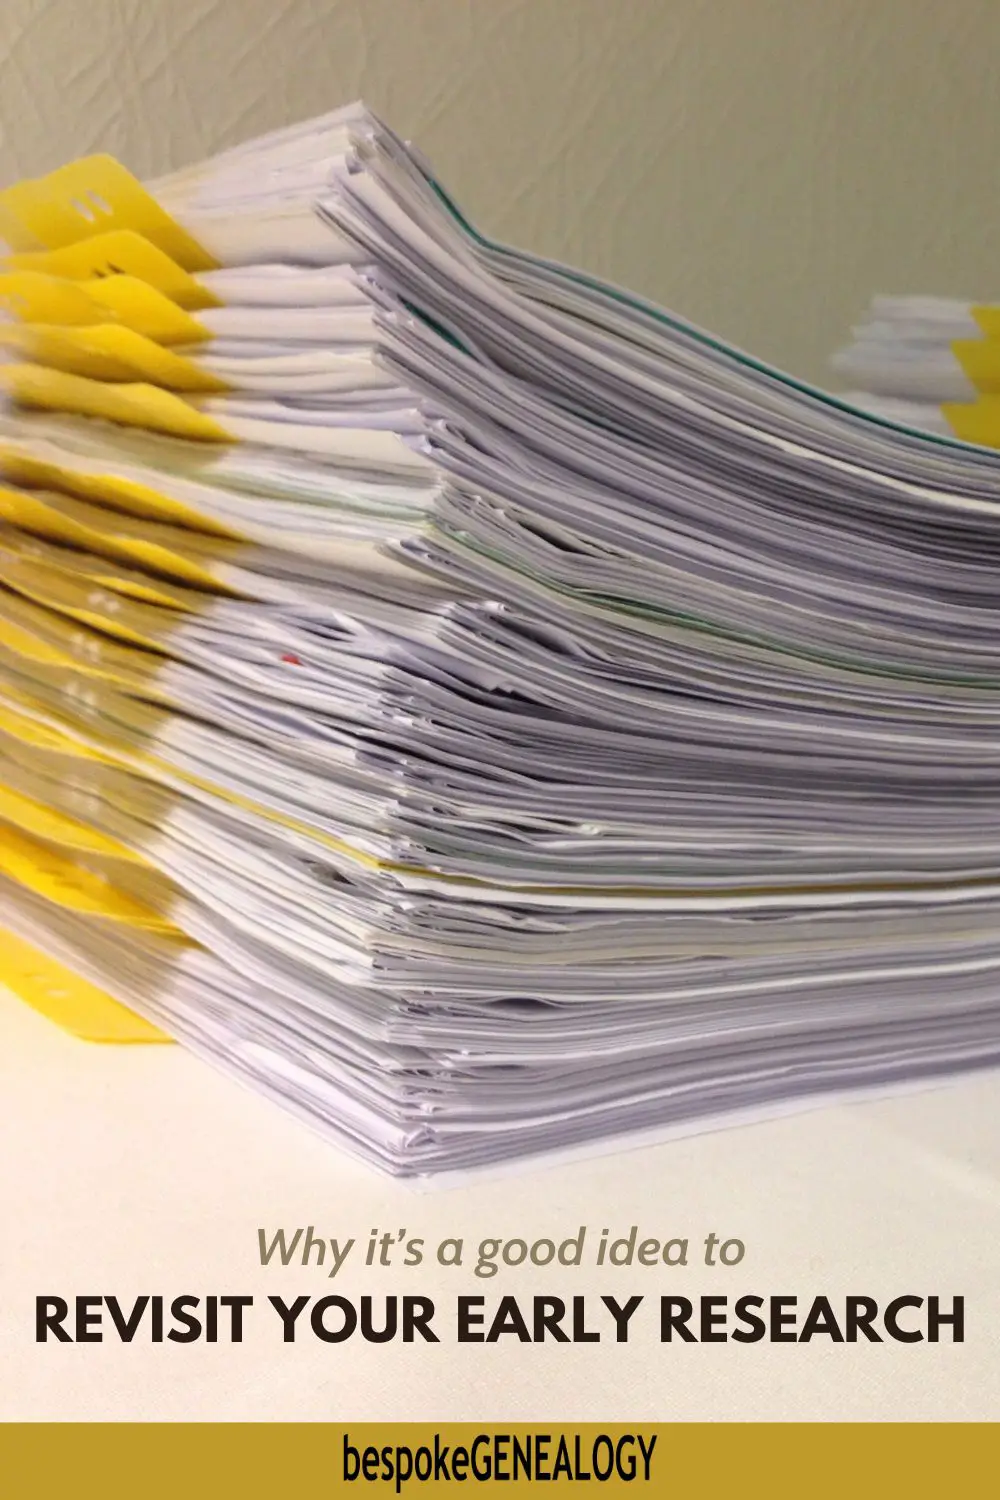 Why it's a good idea to revisit your early research. Photo of a pile of documents.